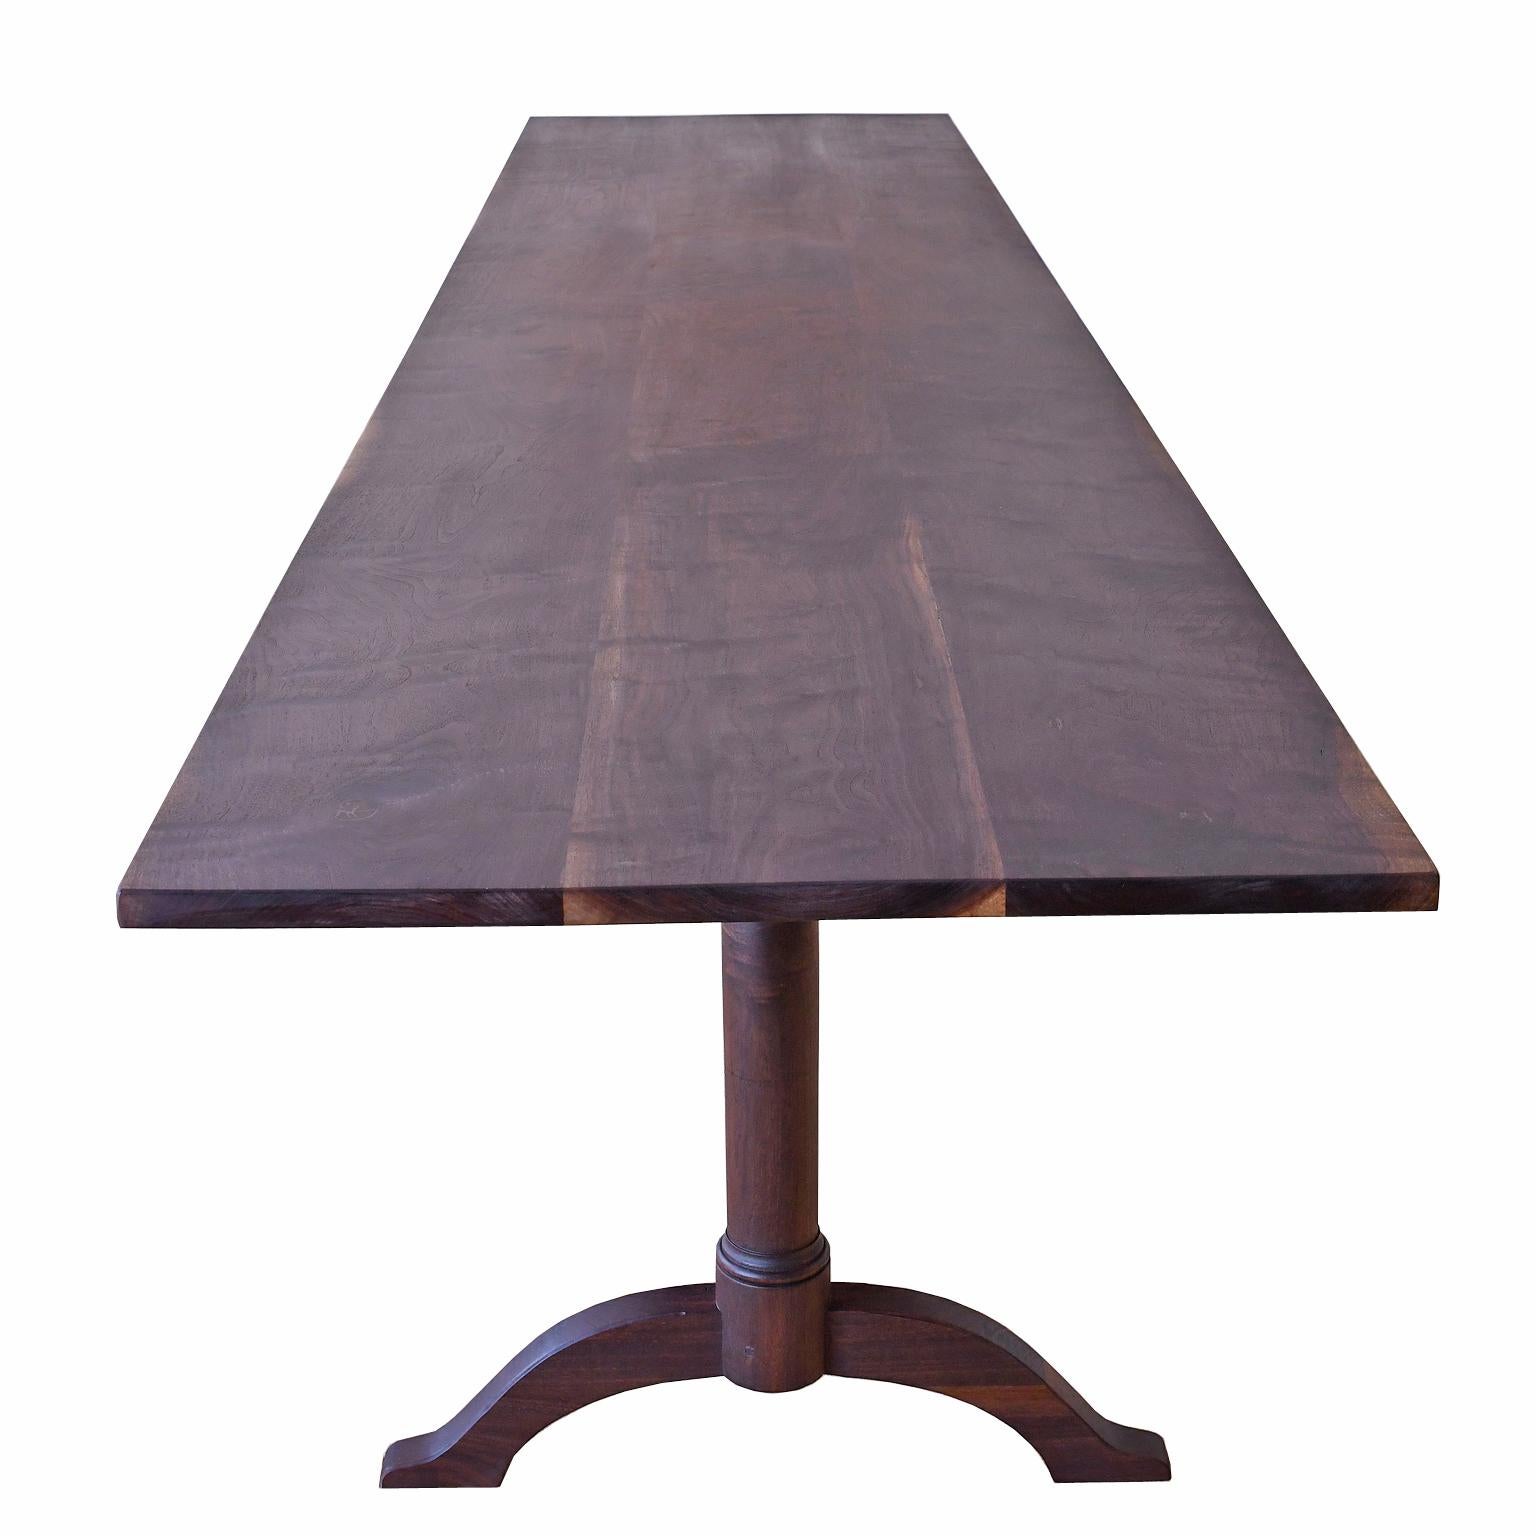 This table as shown is available for immediate delivery or ask us to quote a custom size
A Hancock Village-inspired (Shaker), Bonnin Ashley custom-made dining table or sideboard in American black walnut with a fumed patina finish sealed with a LEED